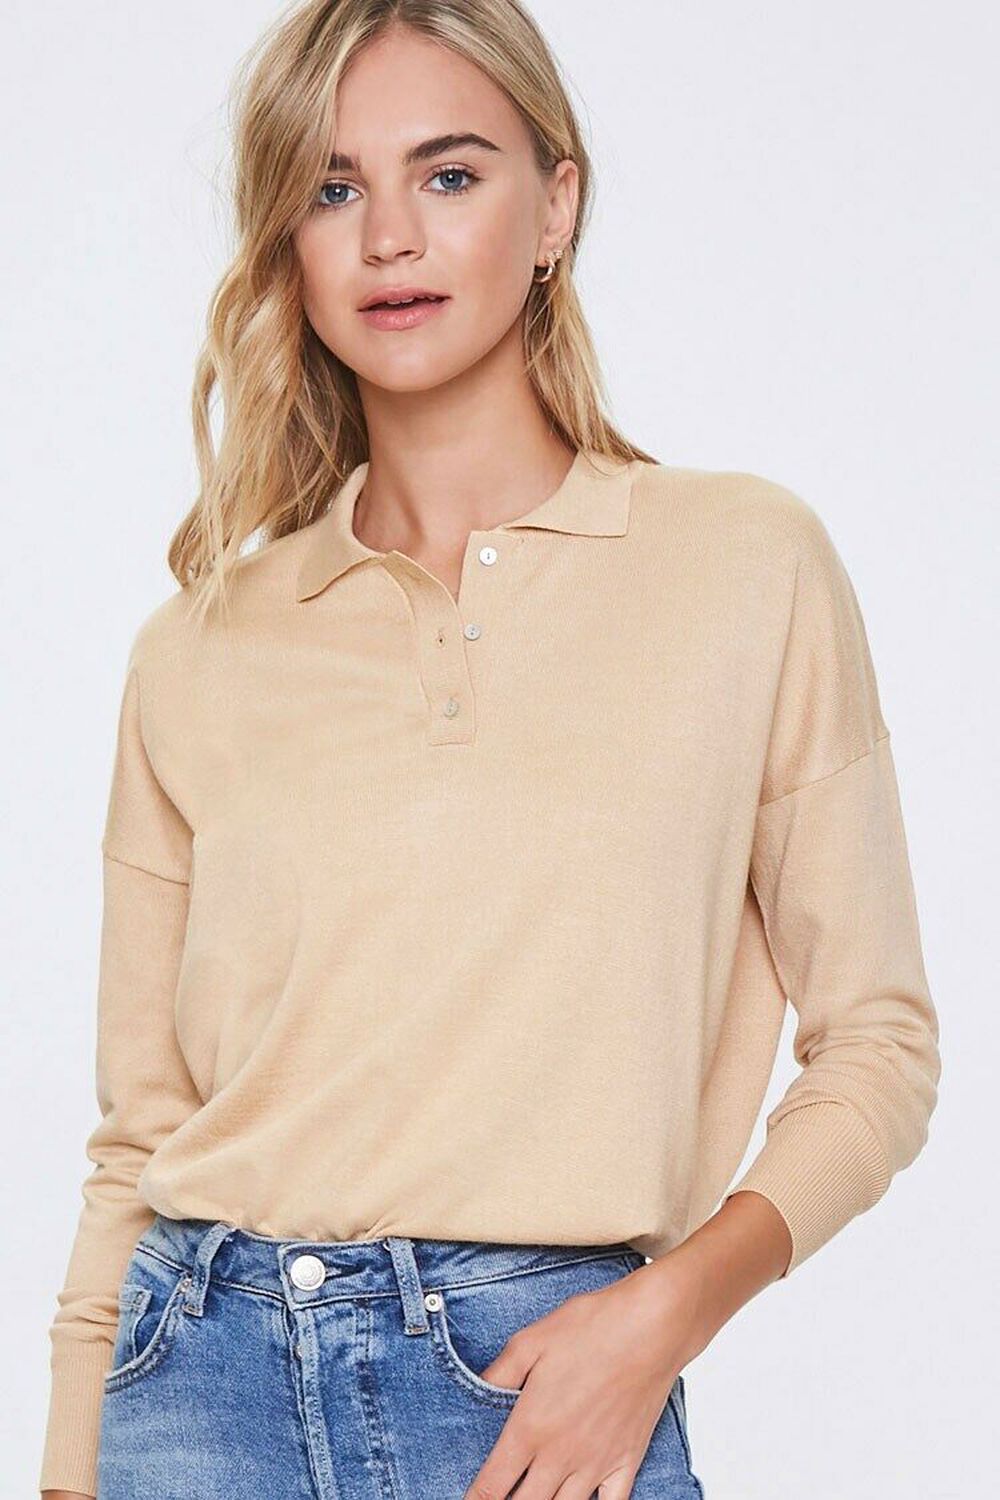 TAUPE Ribbed Collared Top, image 1